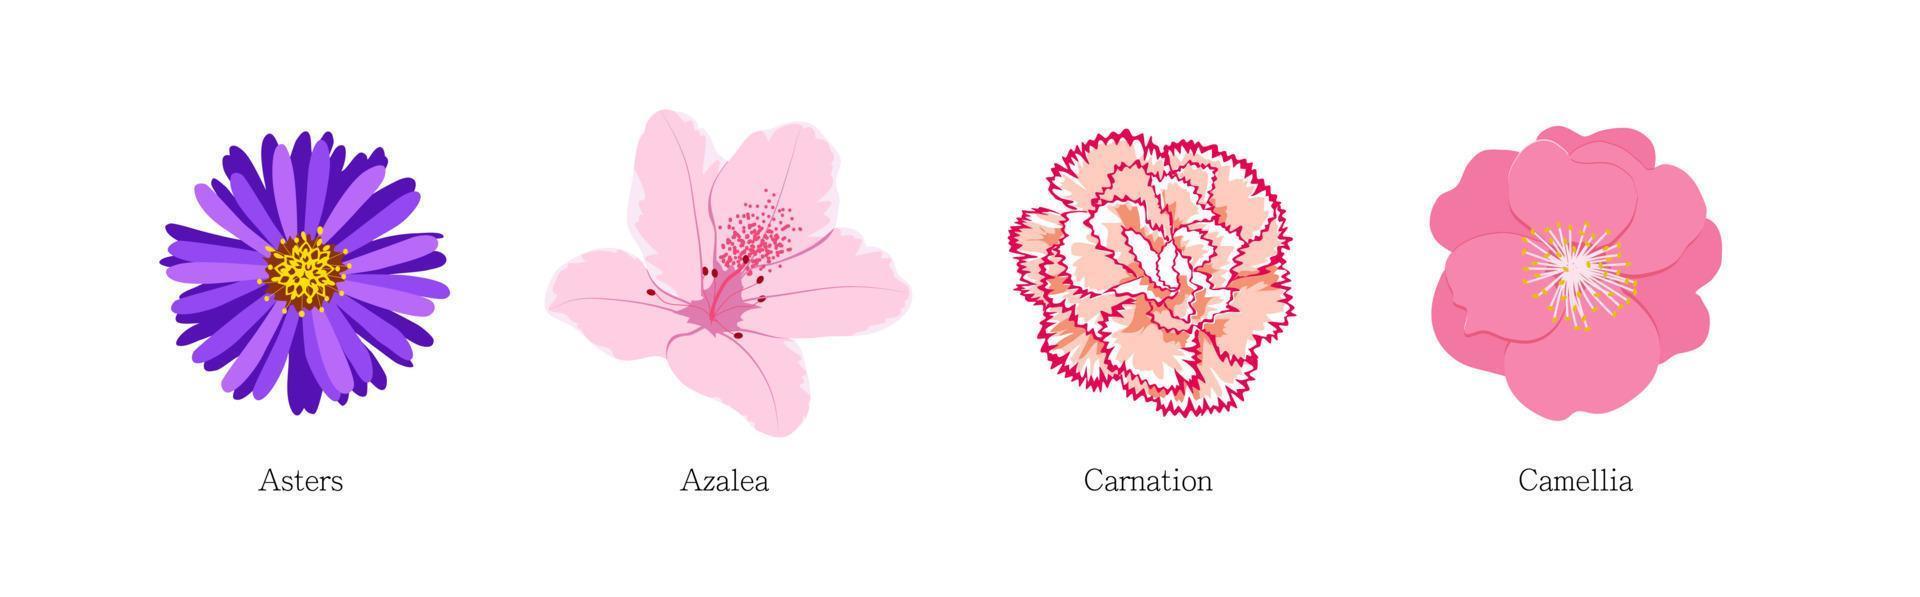 Set of different flowers on white background. vector